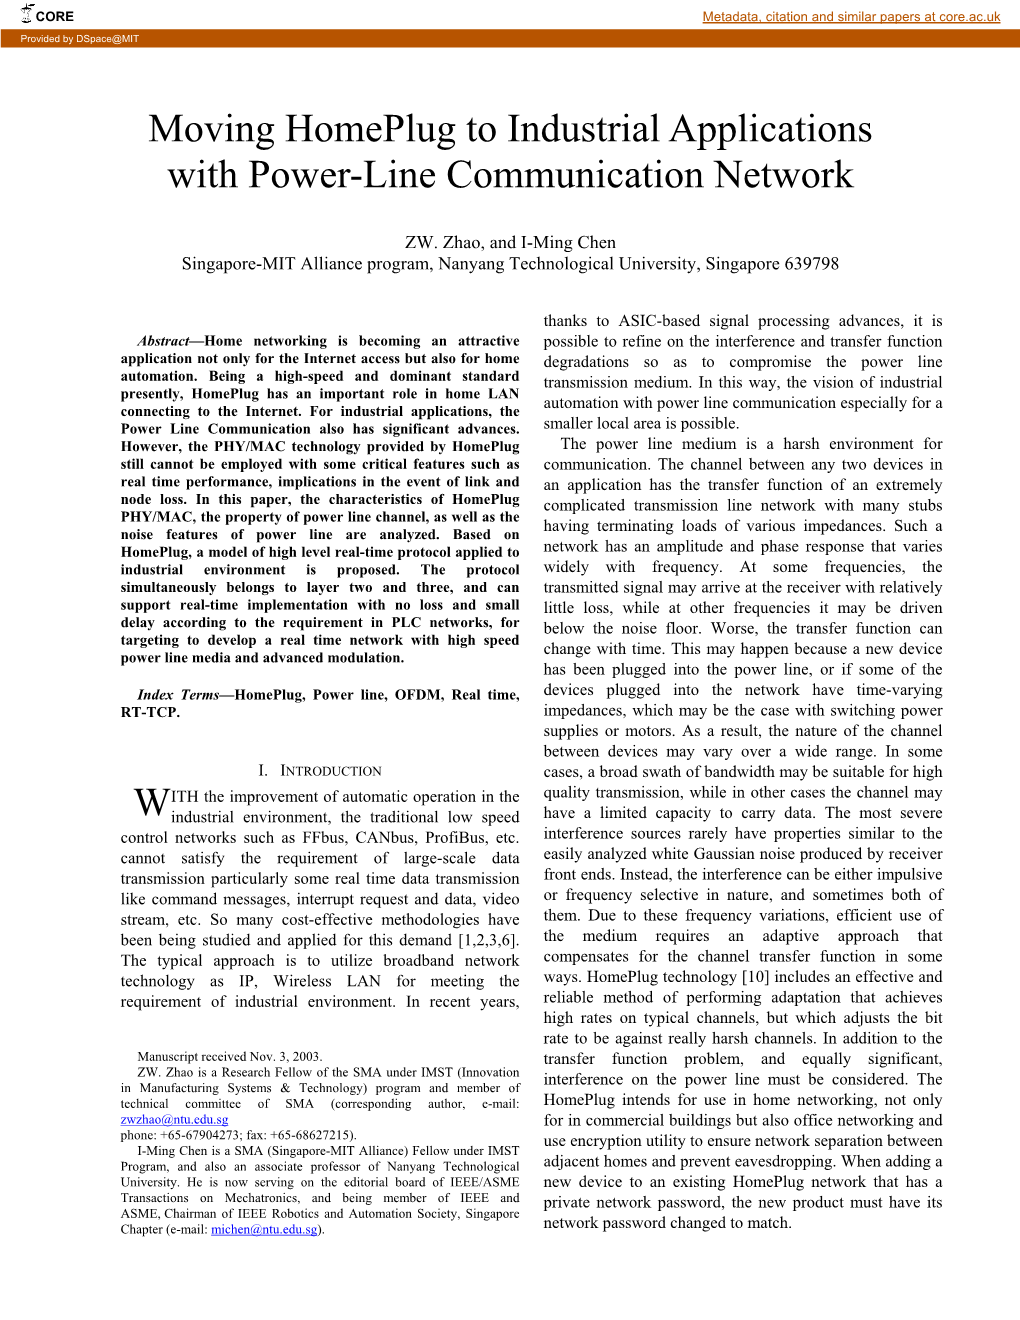 Moving Homeplug to Industrial Applications with Power-Line Communication Network